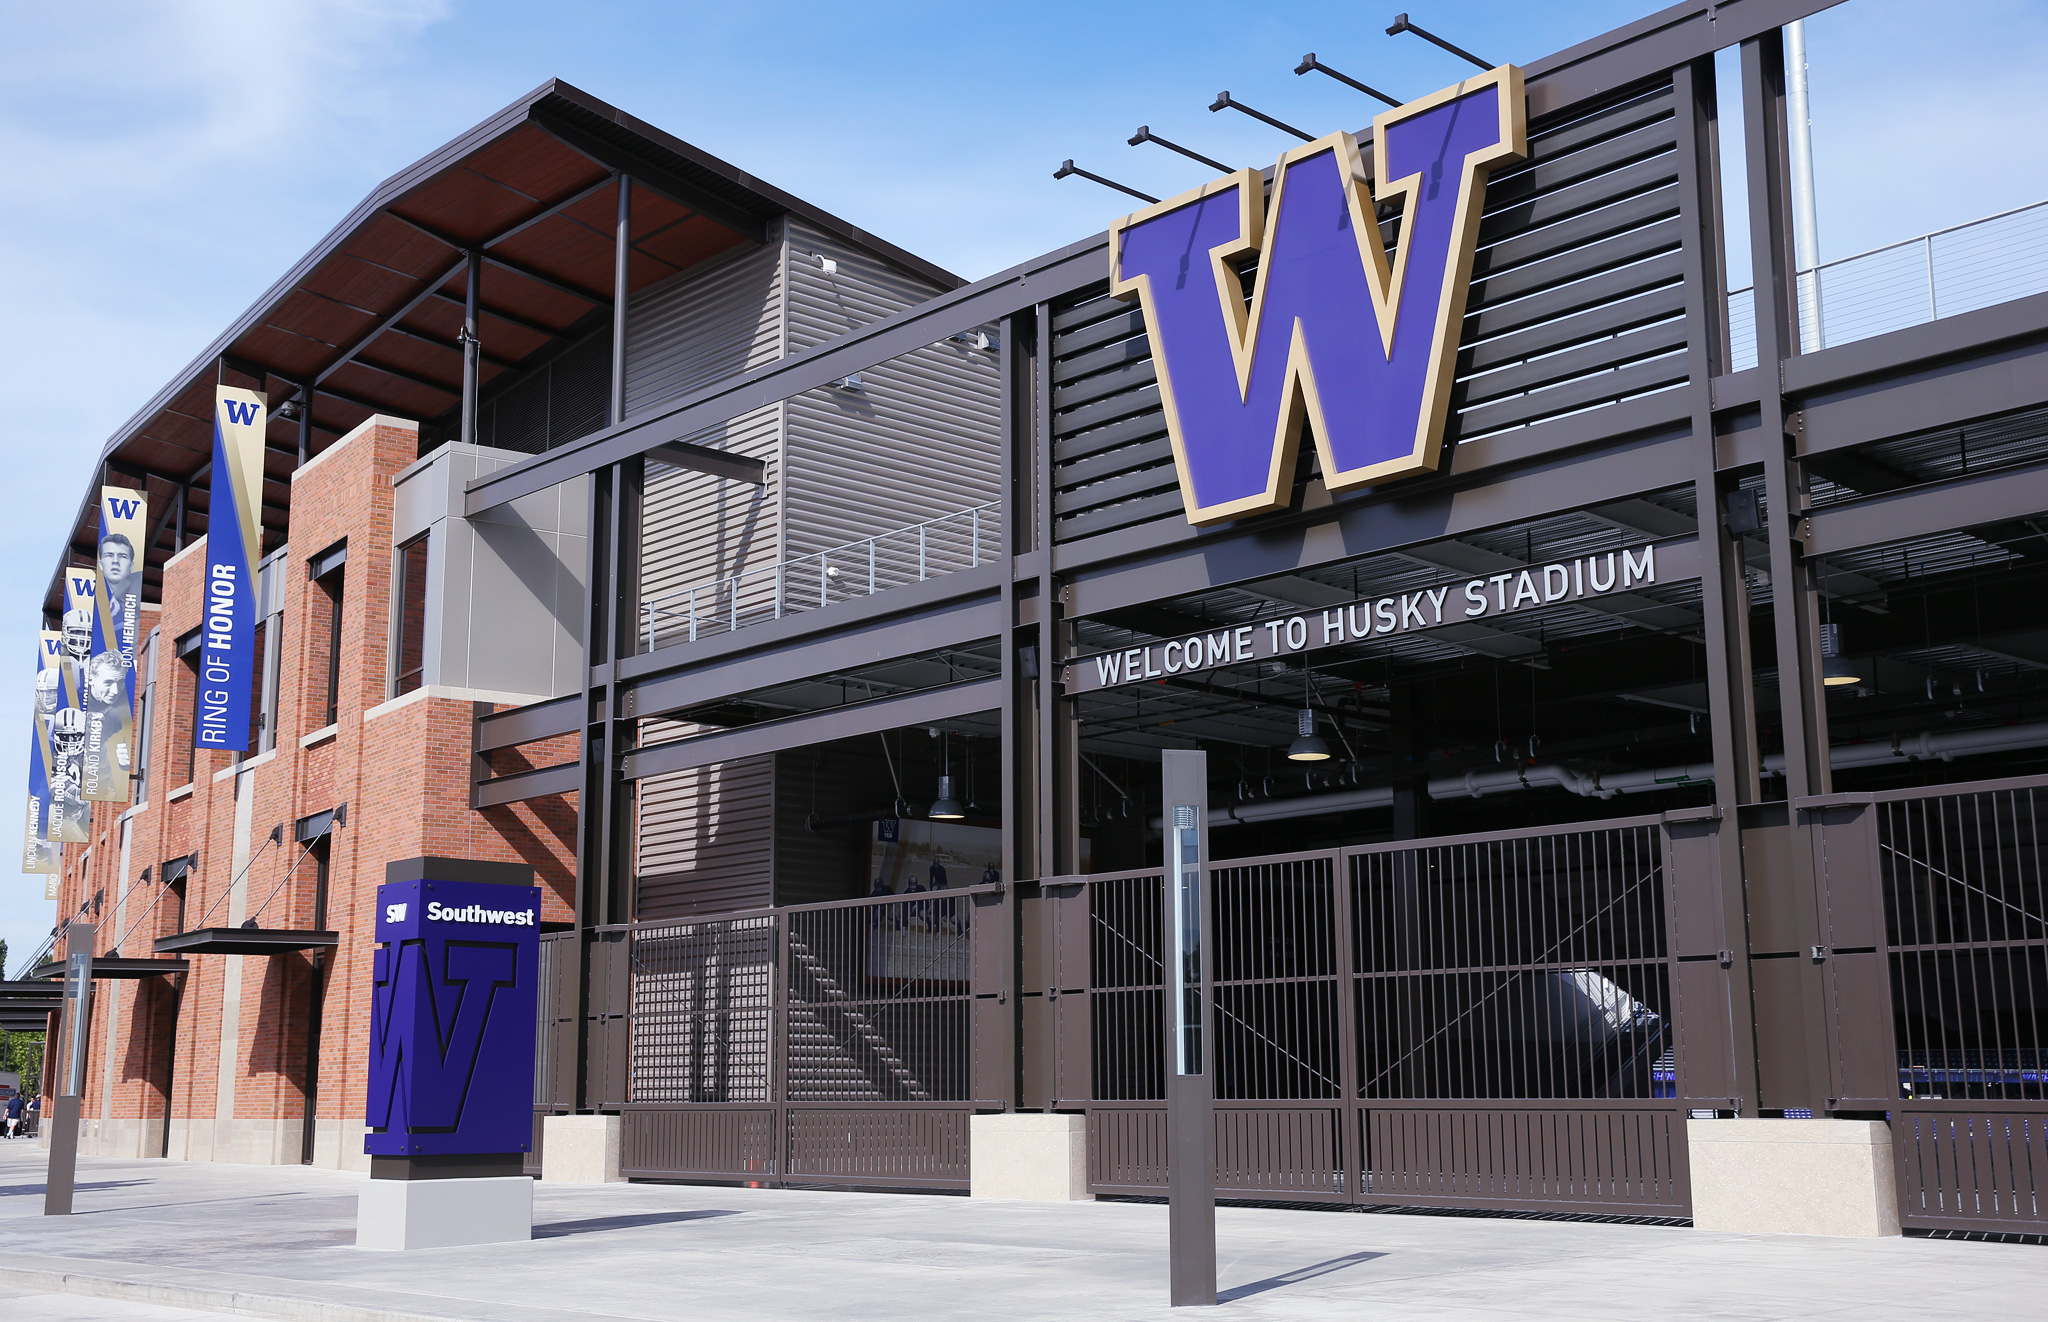 Southwest entrance of Seattle's Husky Stadium - New Digs for the ...